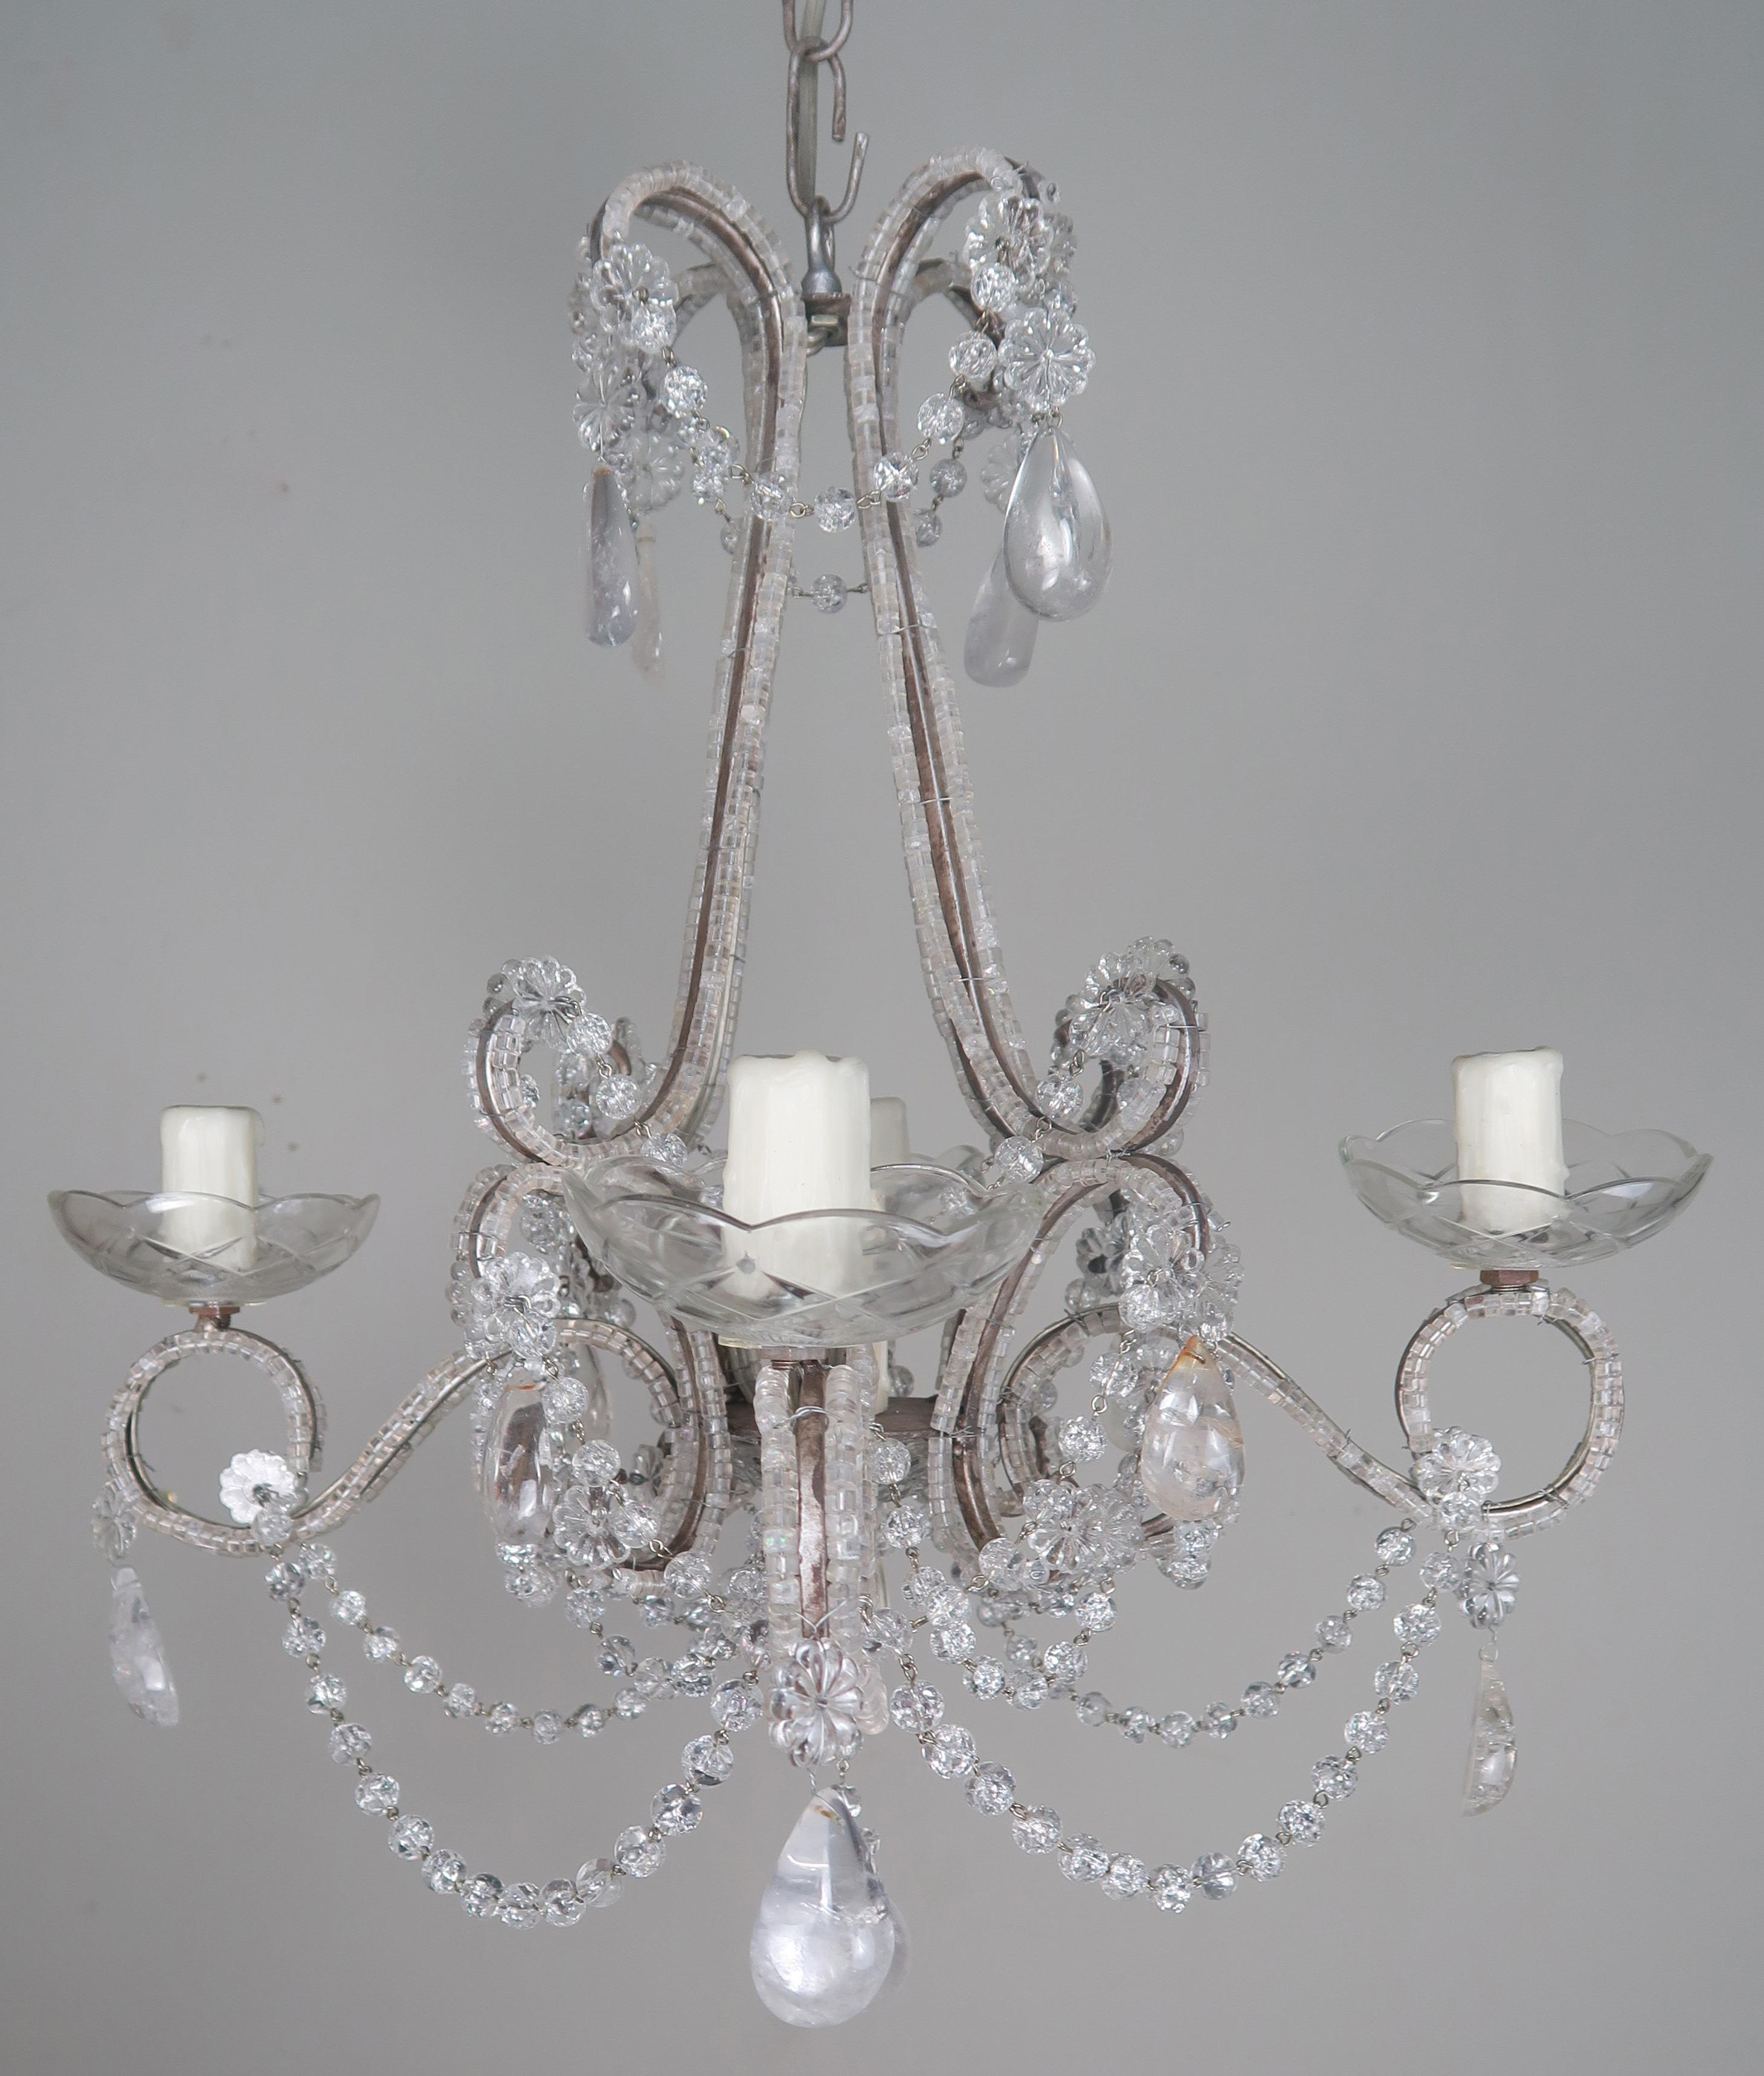 Mid-20th Century Five-Light French Rock Crystal Chandelier, circa 1930s